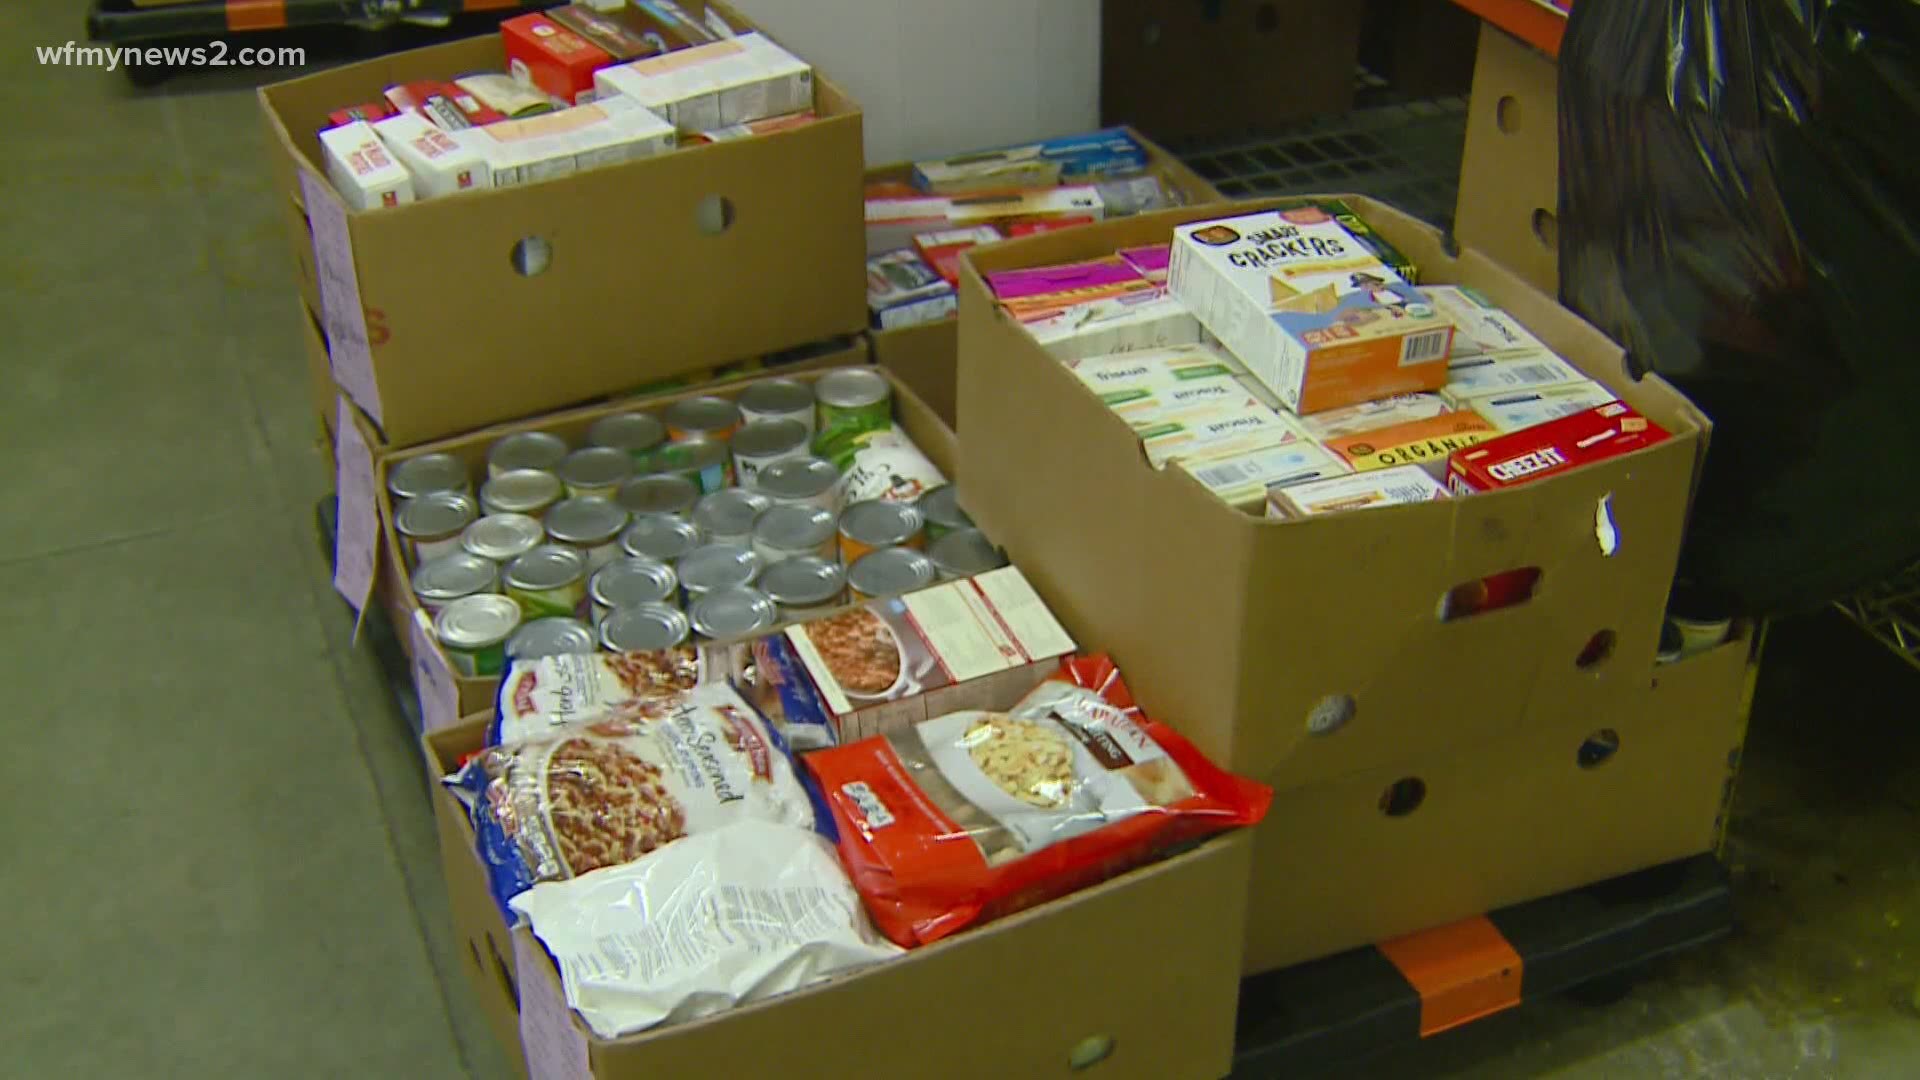 Greensboro Urban Ministry is providing grab-and-go meals and groceries for needy families.